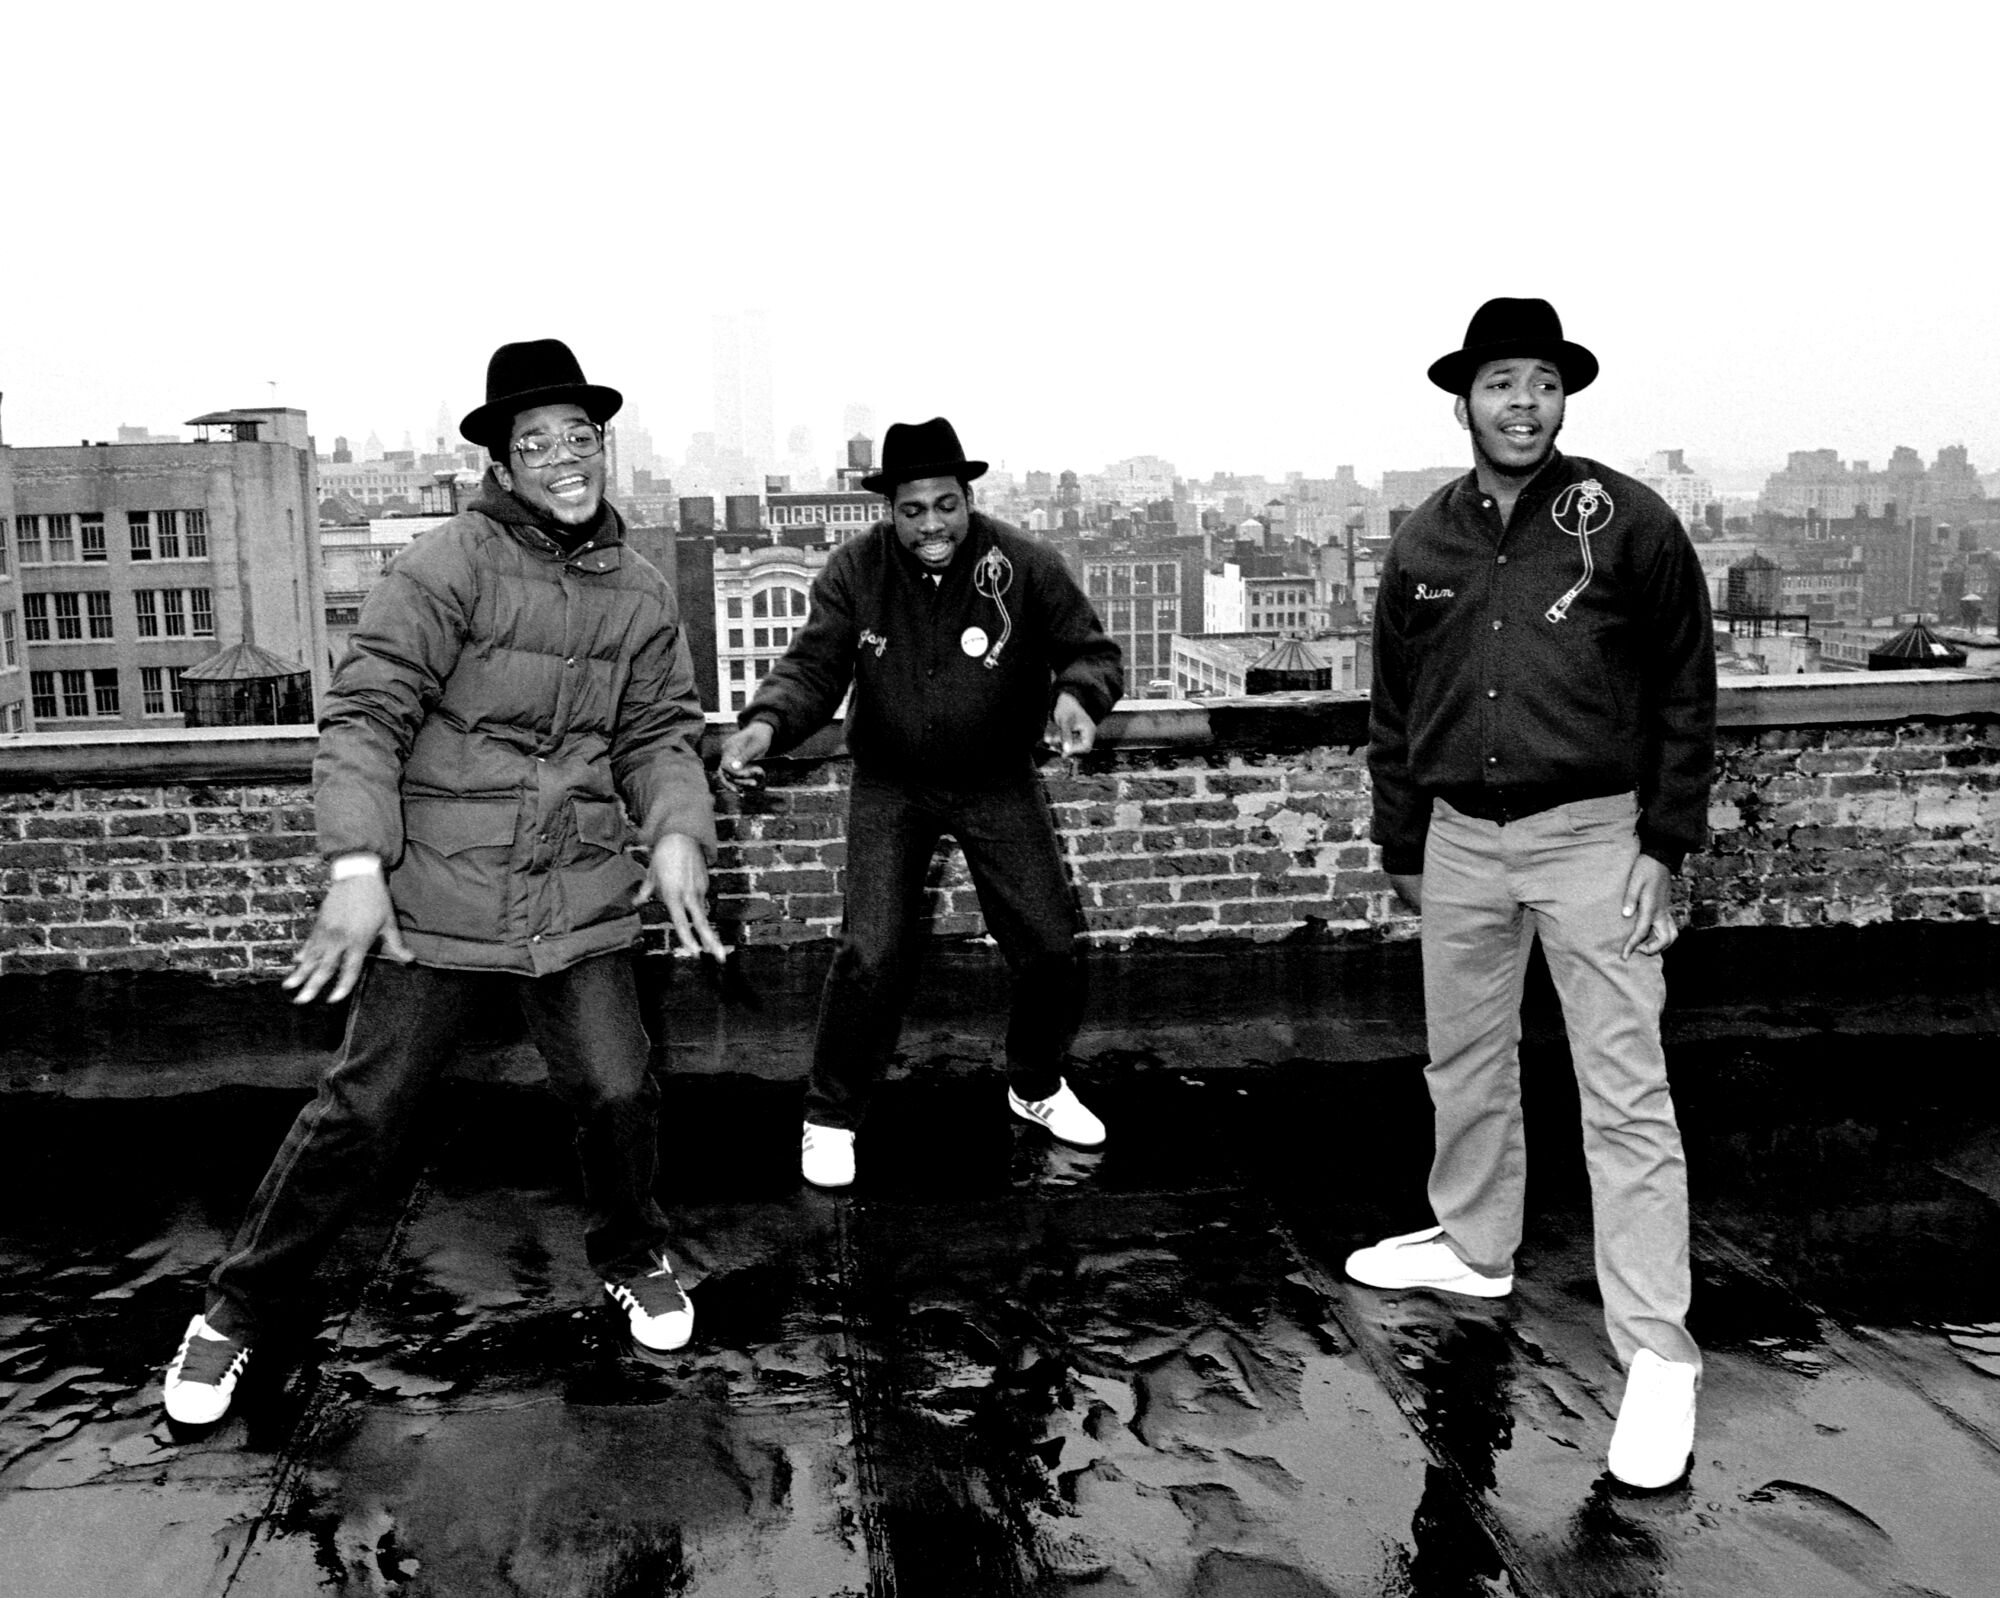 A rap trio on a NYC rooftop.